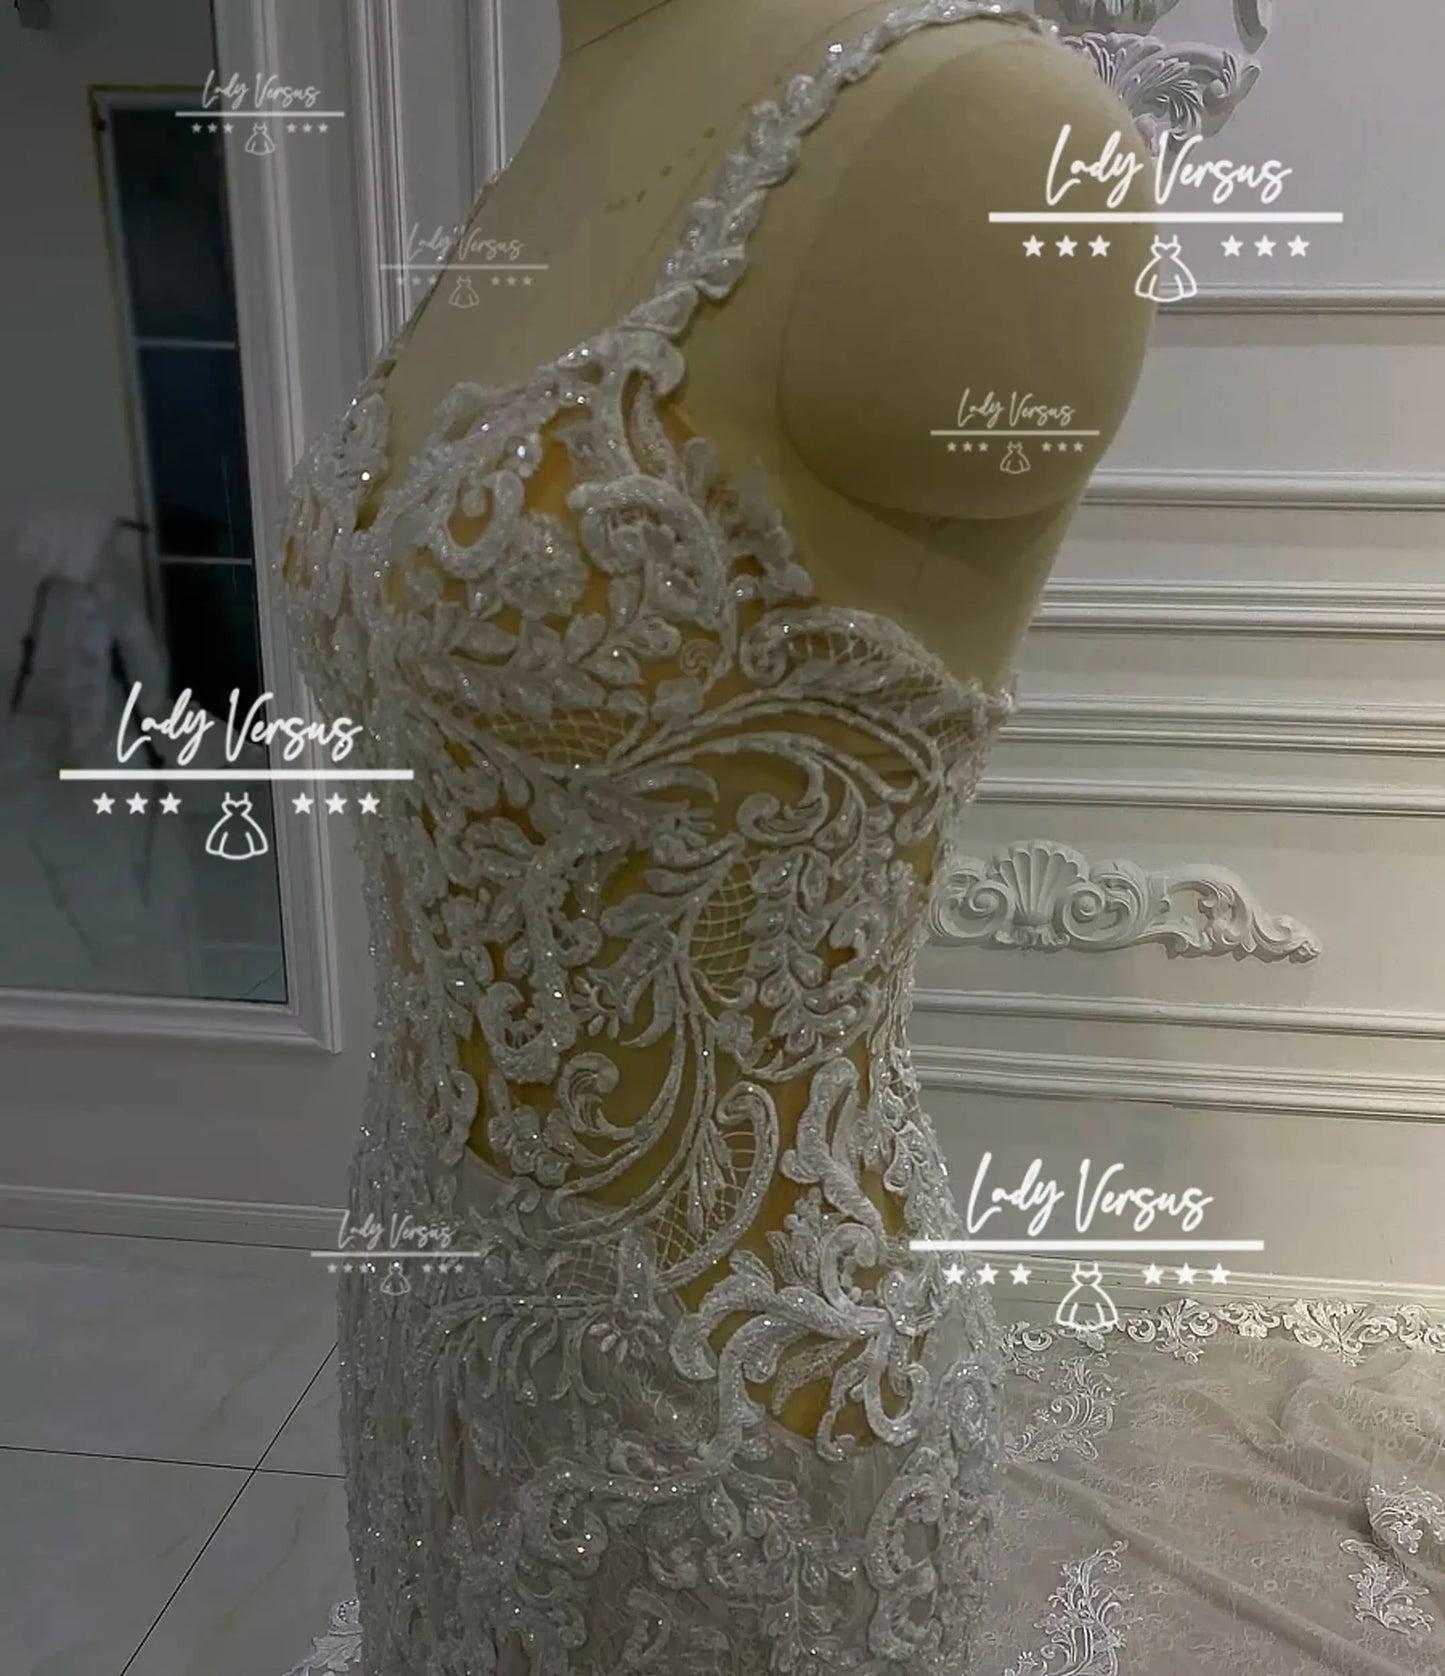 Luxury bridal mermaid style dress/ Extravagant bridal gown/Gorgeous hand beaded wedding dress/ ball gown Lady Versus